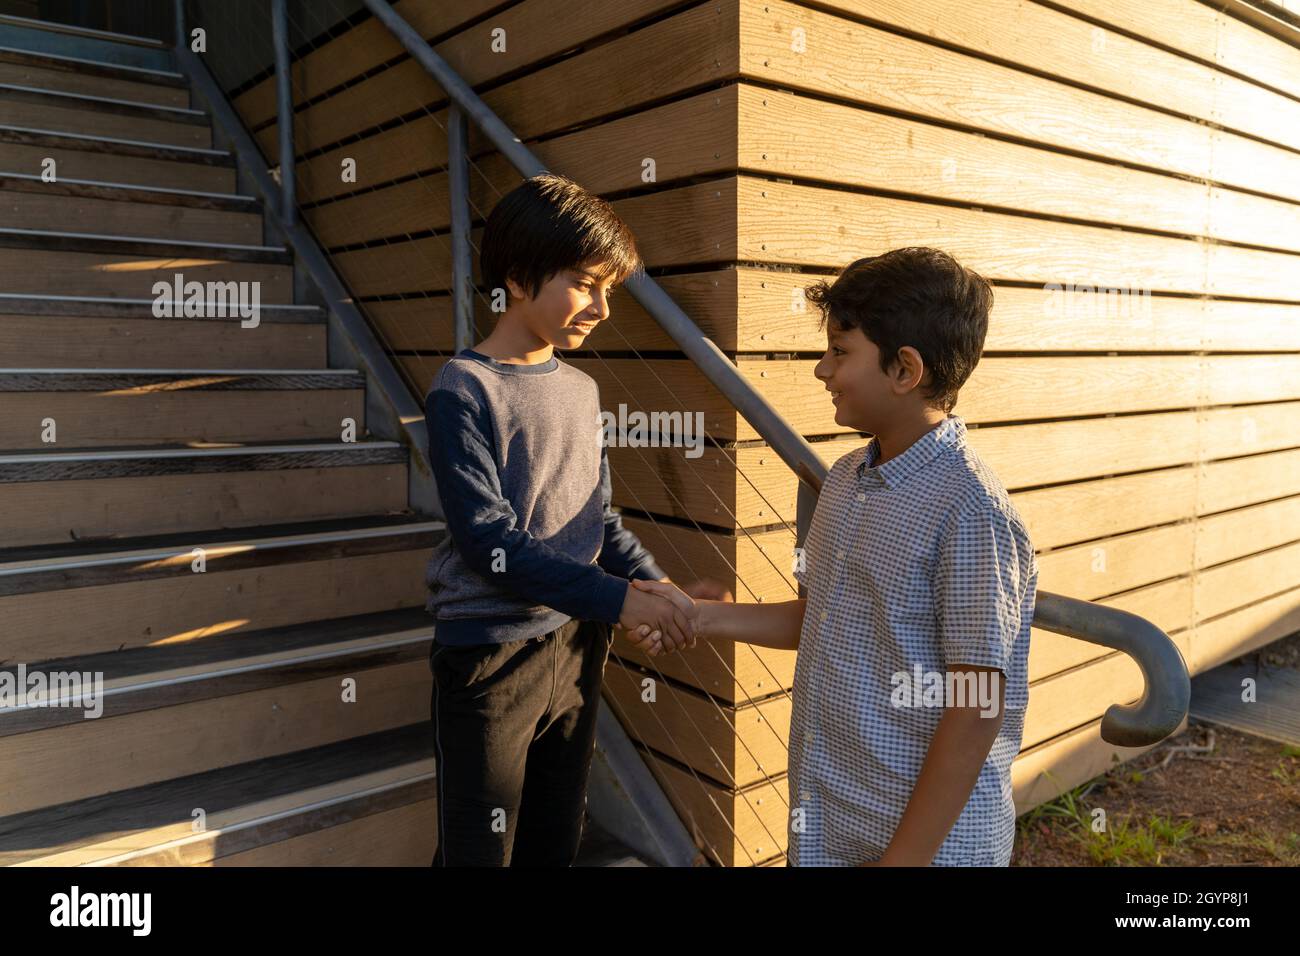 Friends shaking hands. Friendship concept. Two young smiling boys meeting. South Asian kids bonding. Children doing handshake. Stock Photo